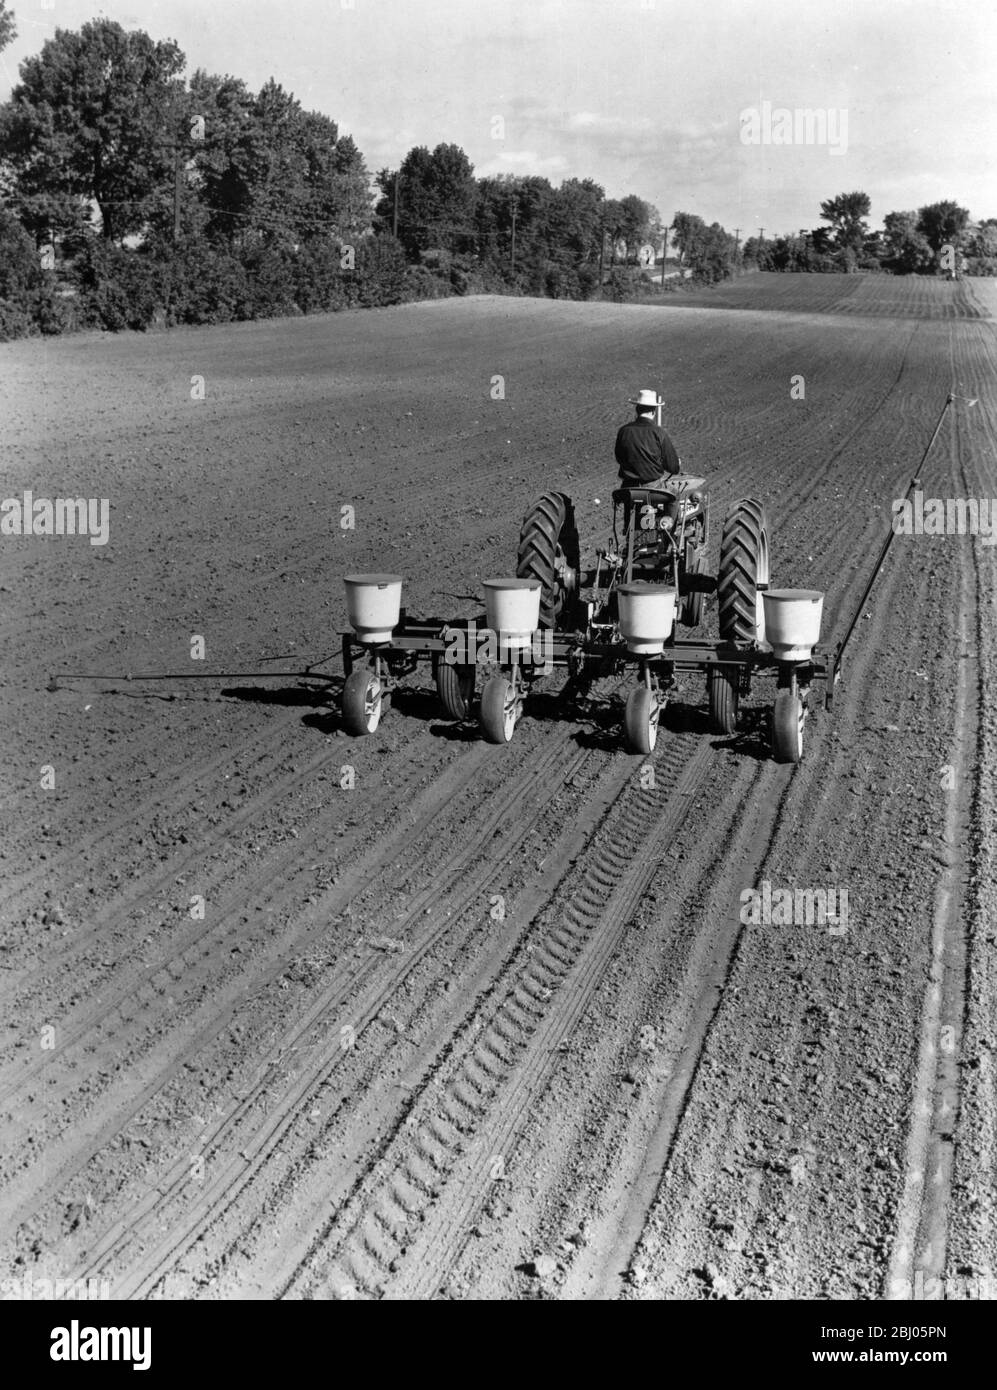 As a result of US tracer research, which proved the advantage of palacing corn fertilizer deep in the soil, the International Harvester Company designed, built and made available to farmers an improved corn planter. The disc type applicator on this new four row planter deposits fertilizer four inches underground on each side of the seed row. Use of the planter has resulted in much larger corn yields and increased profits for farmers - September 12th Stock Photo